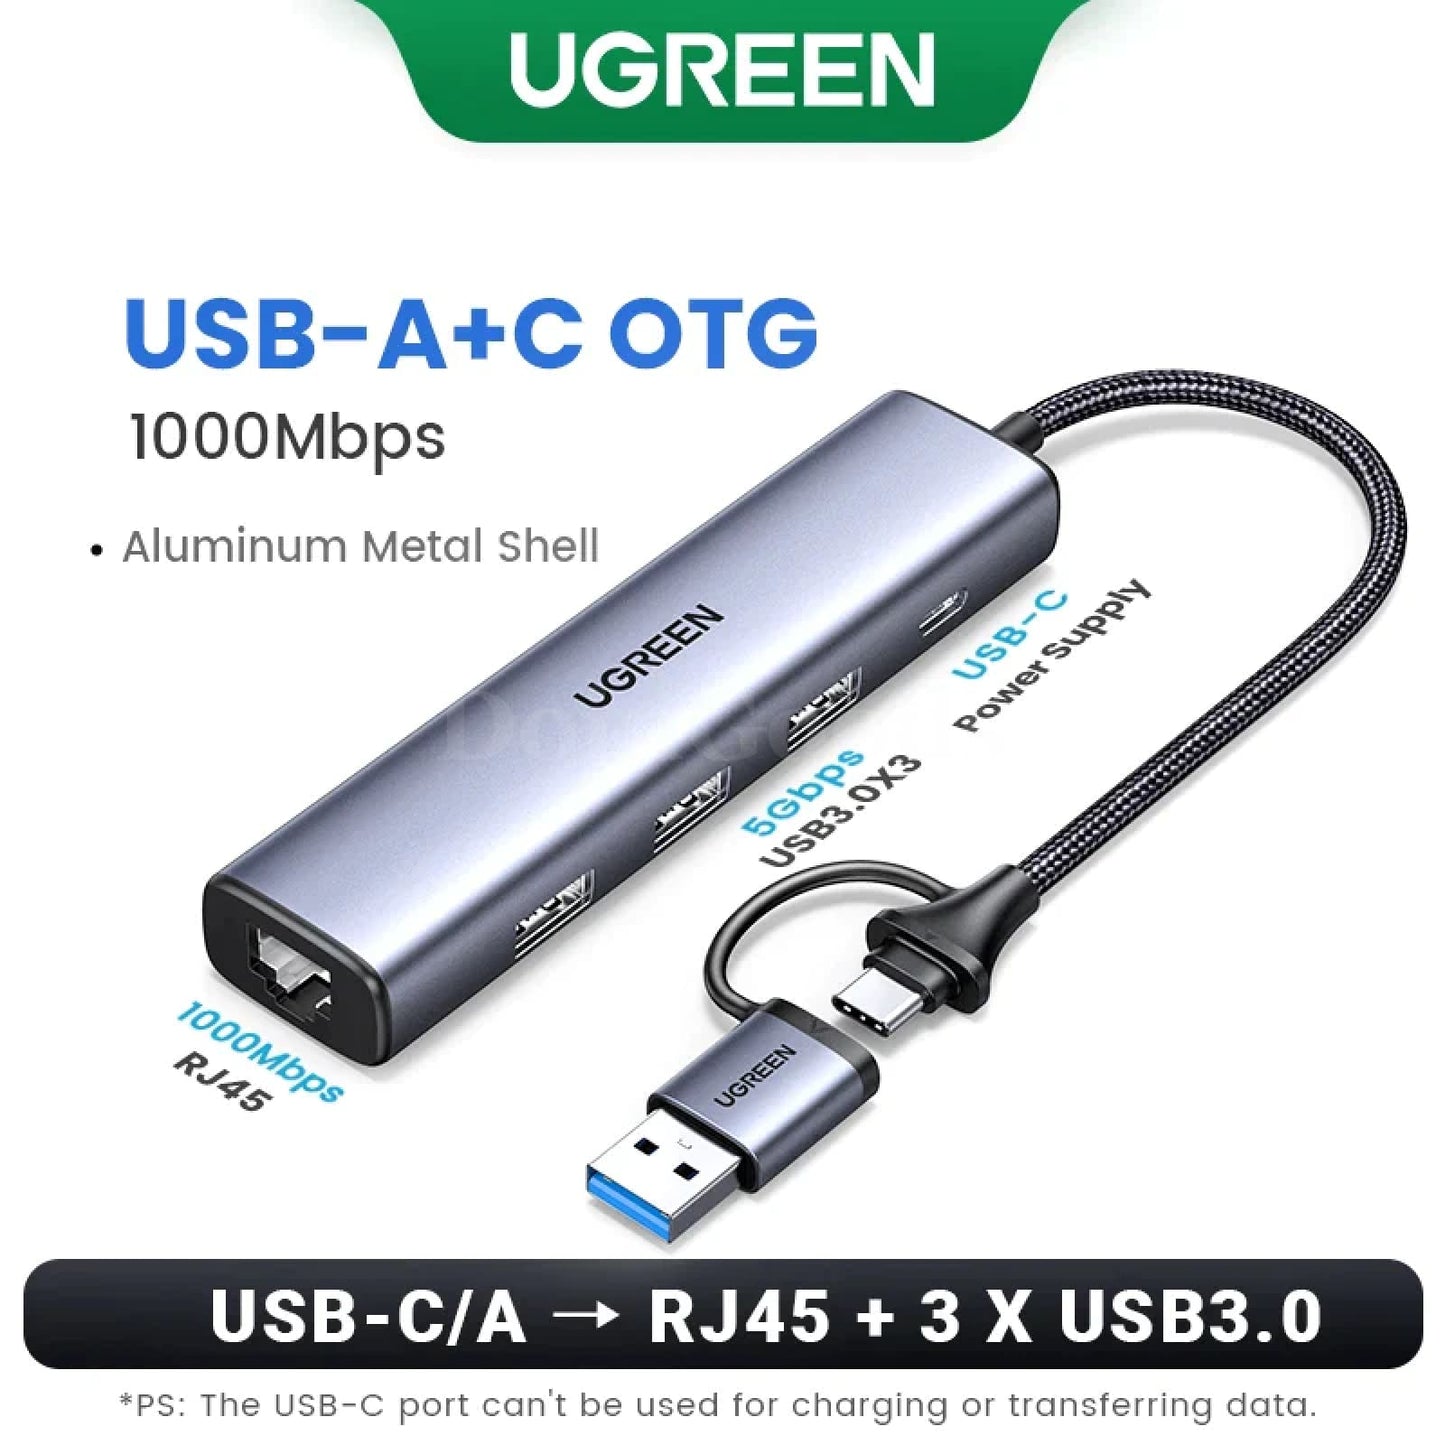 Ugreen Usb Ethernet Adapter 1000/100Mbps 3.0 Hub For Xiaomi Mi Box Macbook 2-In-1 1000Mbps 301635